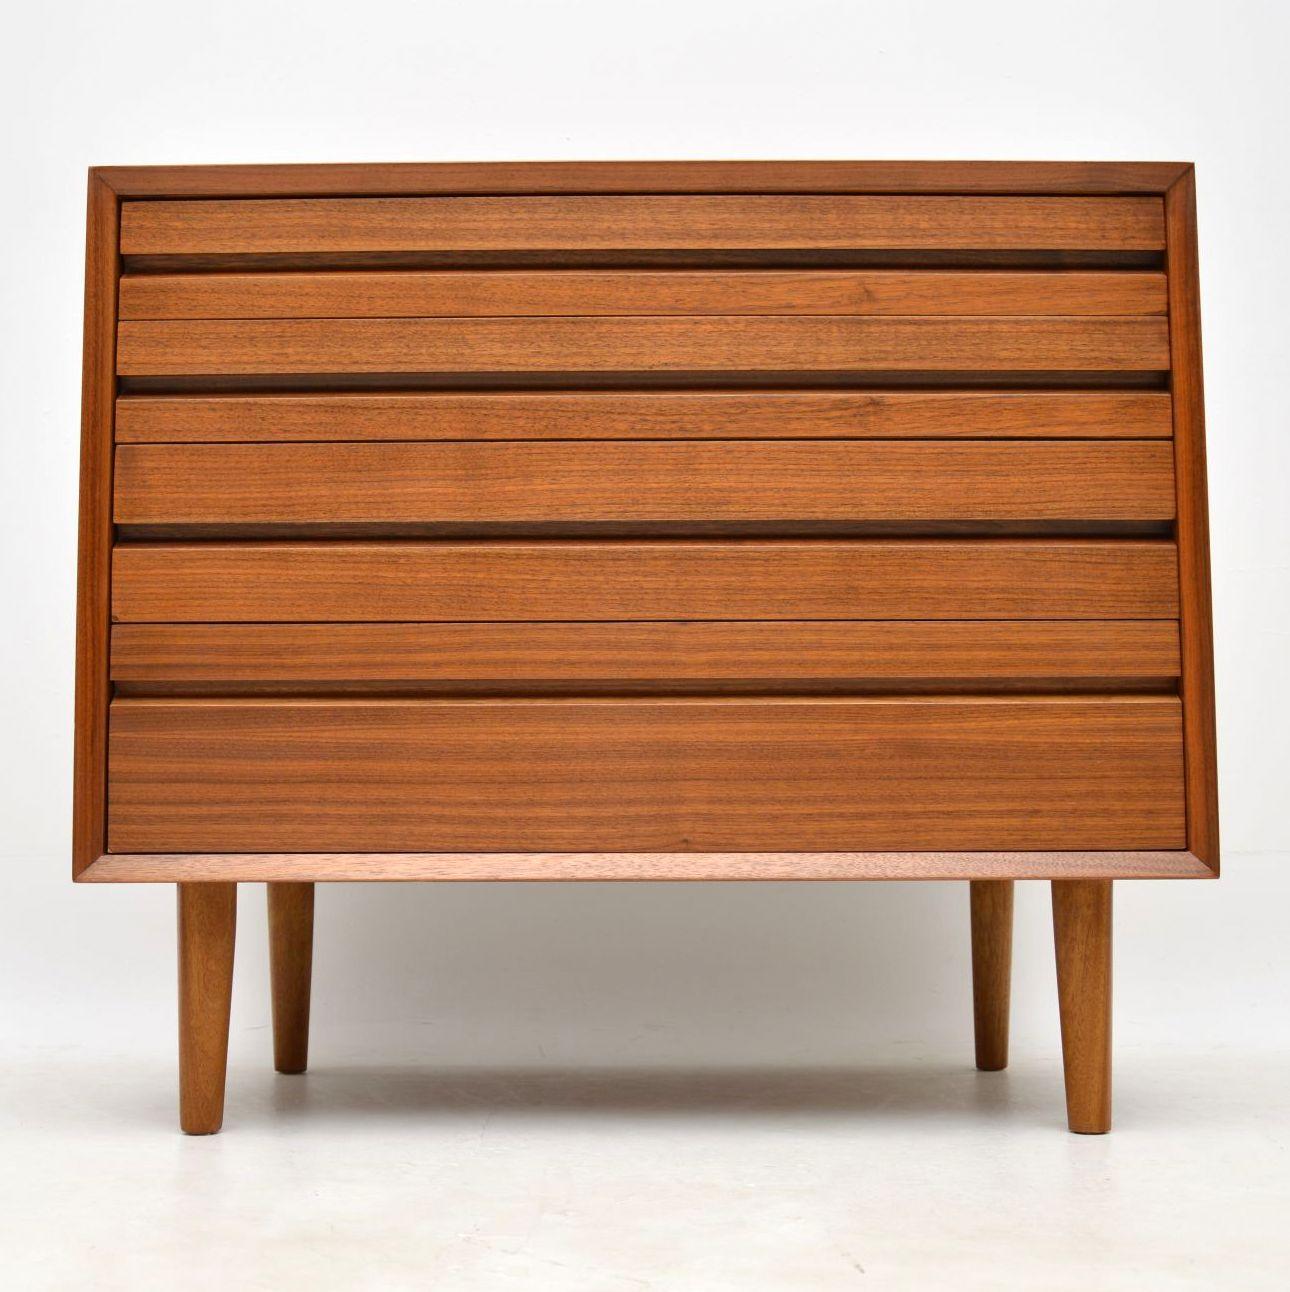 A stunning and rarely seen Danish walnut chest of drawers, designed by Poul Cadovius and made by his company Cado around the 1960’s. This is the first we’ve seen in walnut. The quality is superb, it has a fantastic minimal design. We have had this